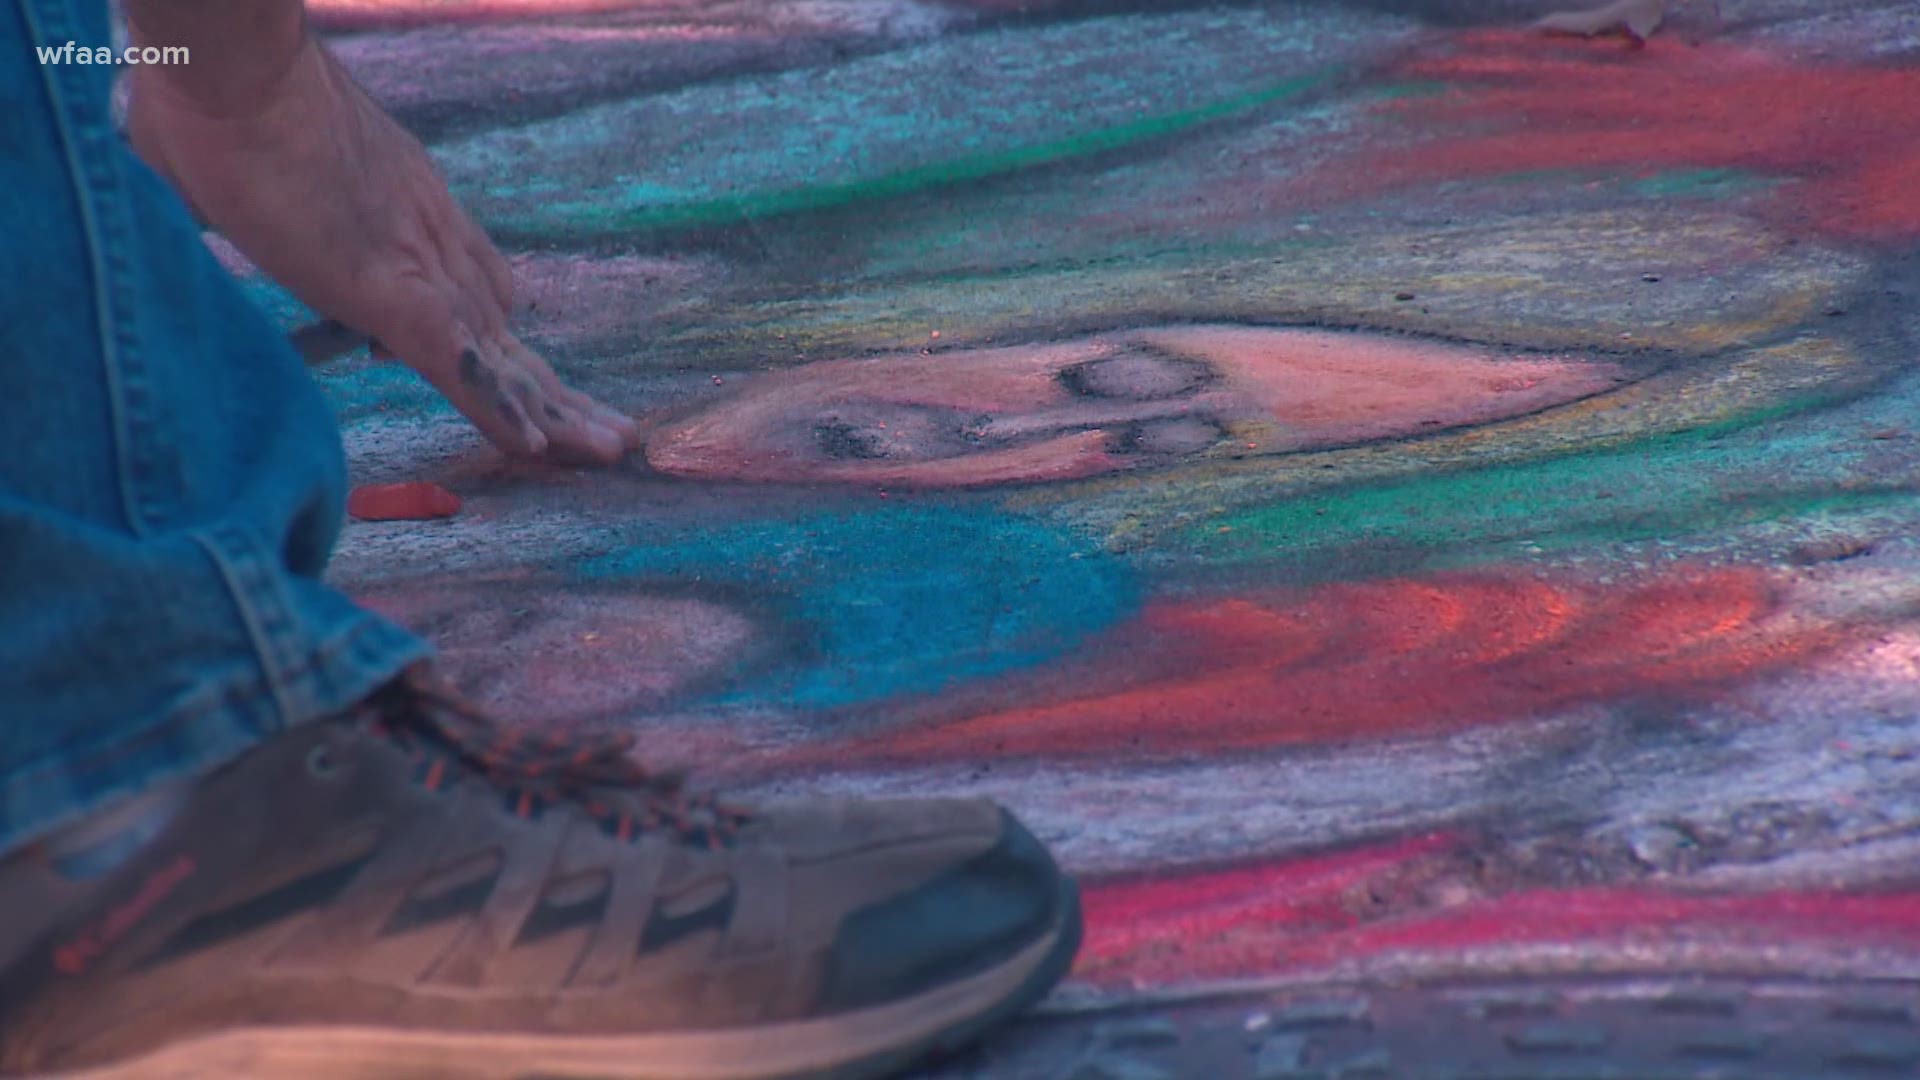 Greg Rogers is hopeful that with his chalk art people will be more inclined to get out of their isolation and out into the neighborhood.